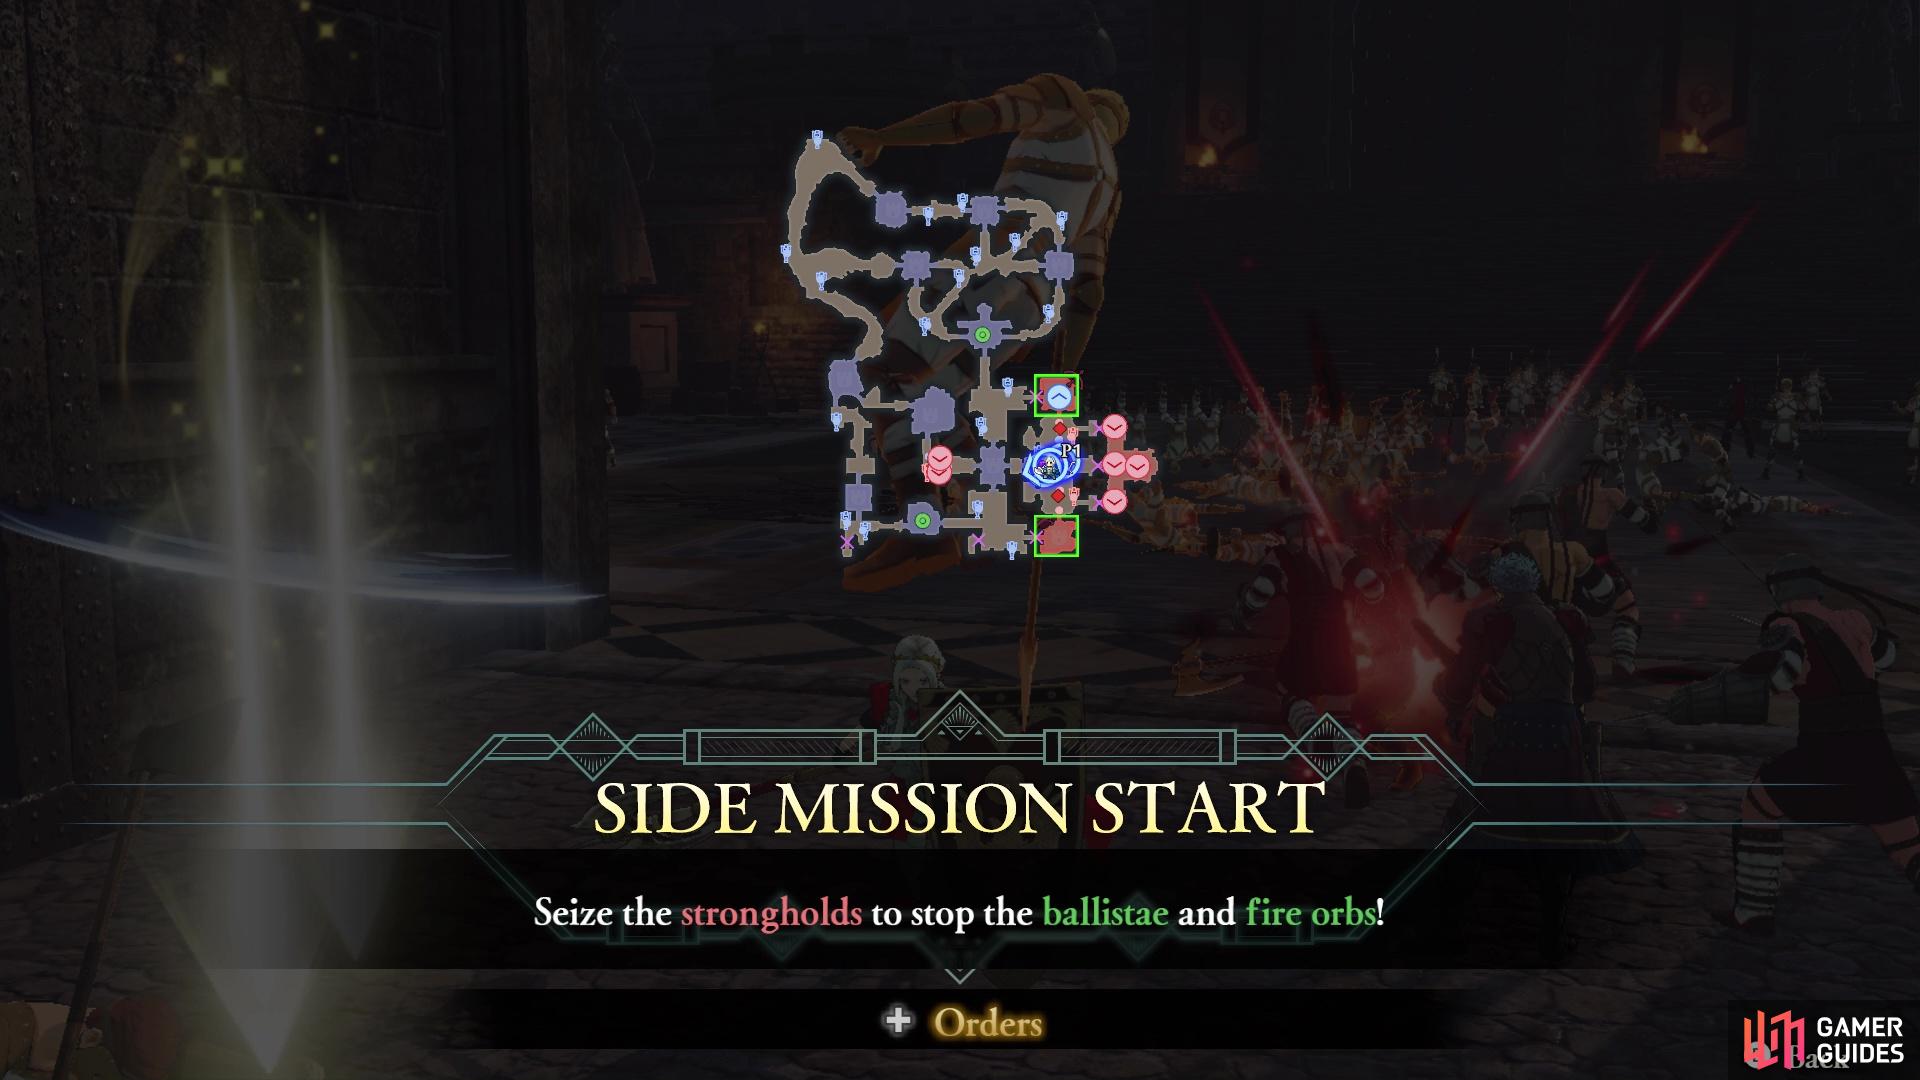 You will want to do this side mission